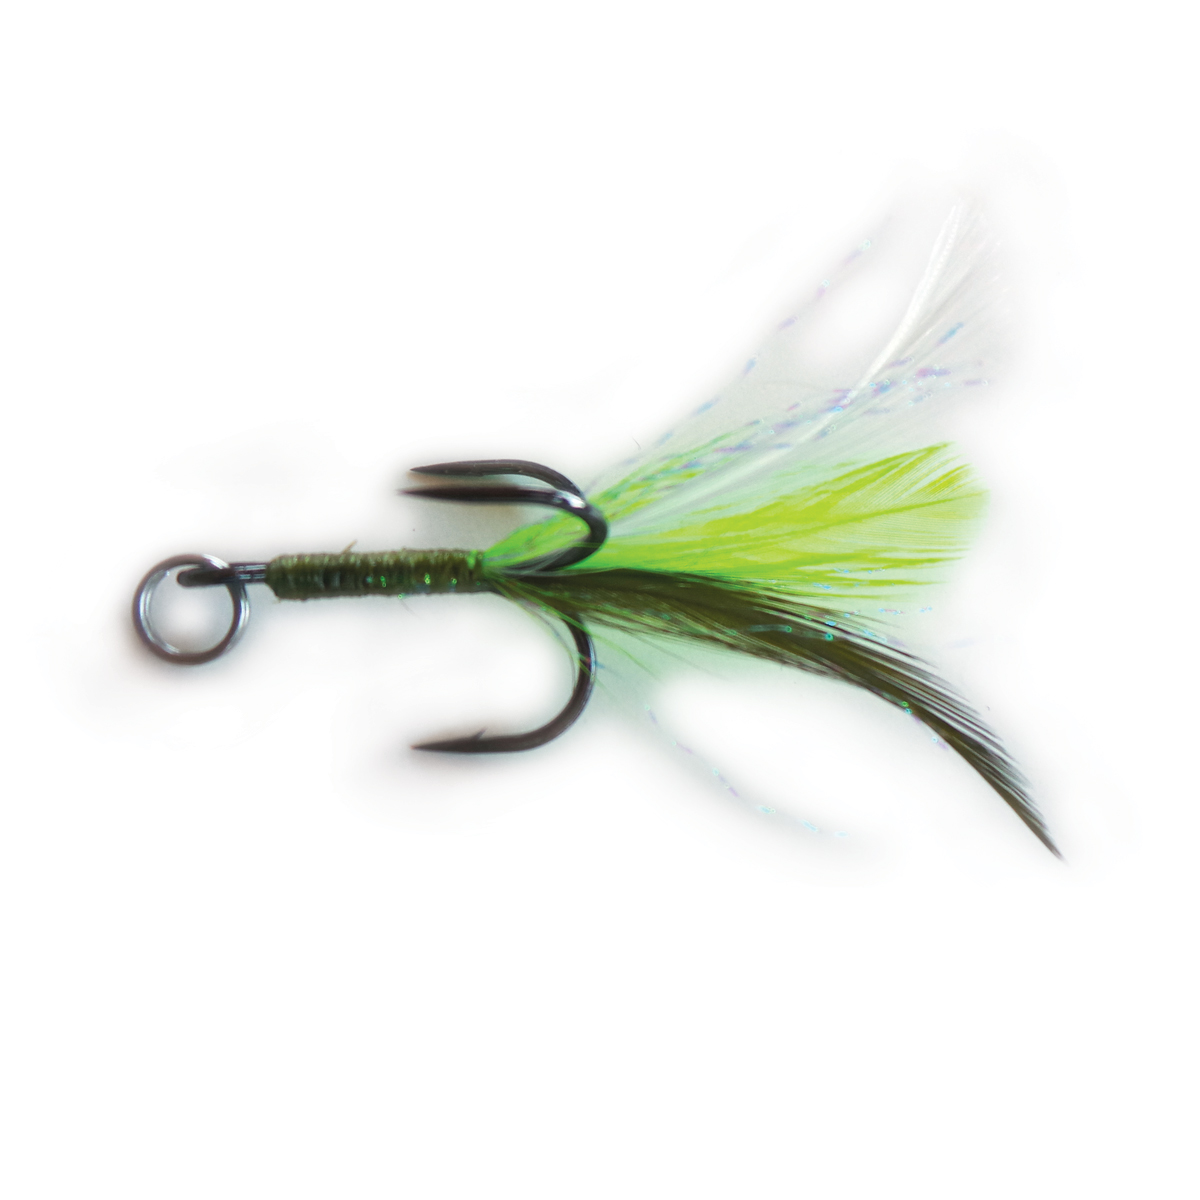 Gamakatsu G-Finesse Feathered Treble MH, Feathered Treble, 55% OFF